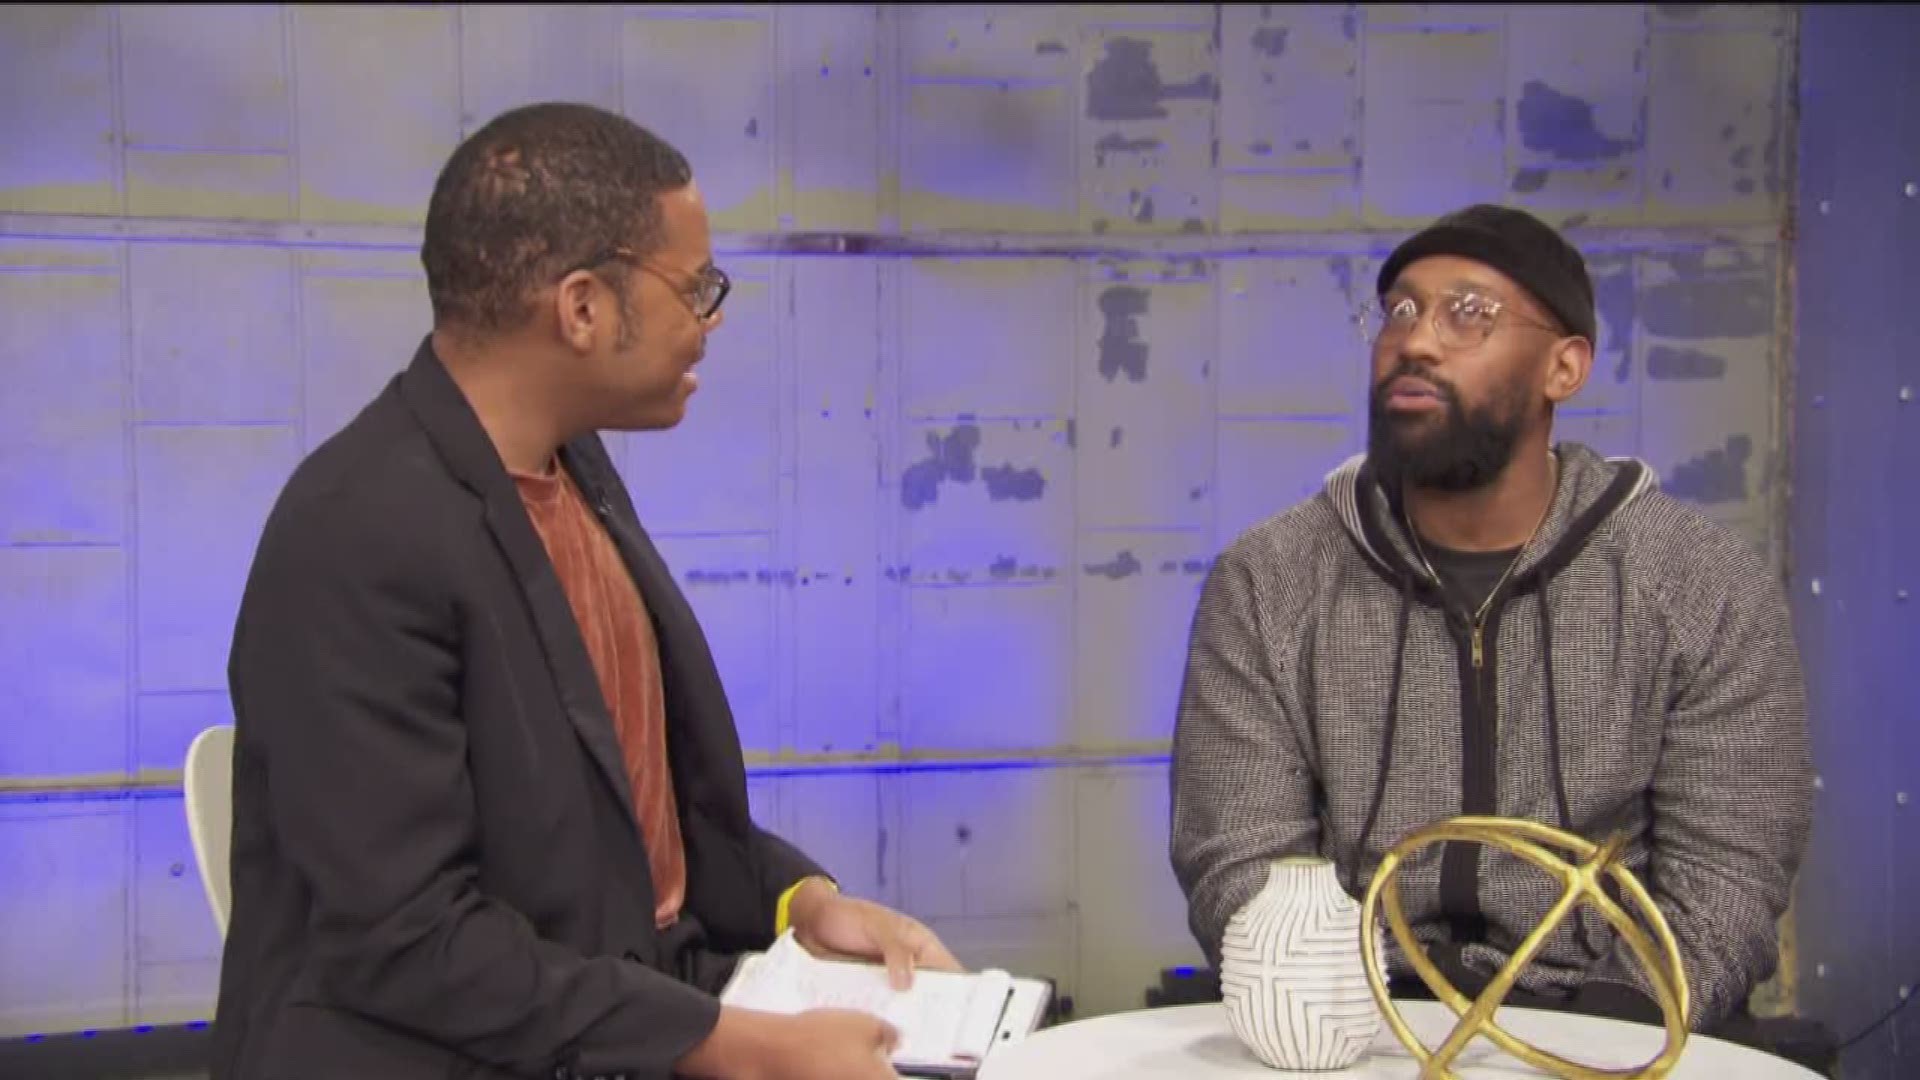 Singer PJ Morton discussed his 3 GRAMMY nominations and played a game where Malik found on how deep his love was for certain items.